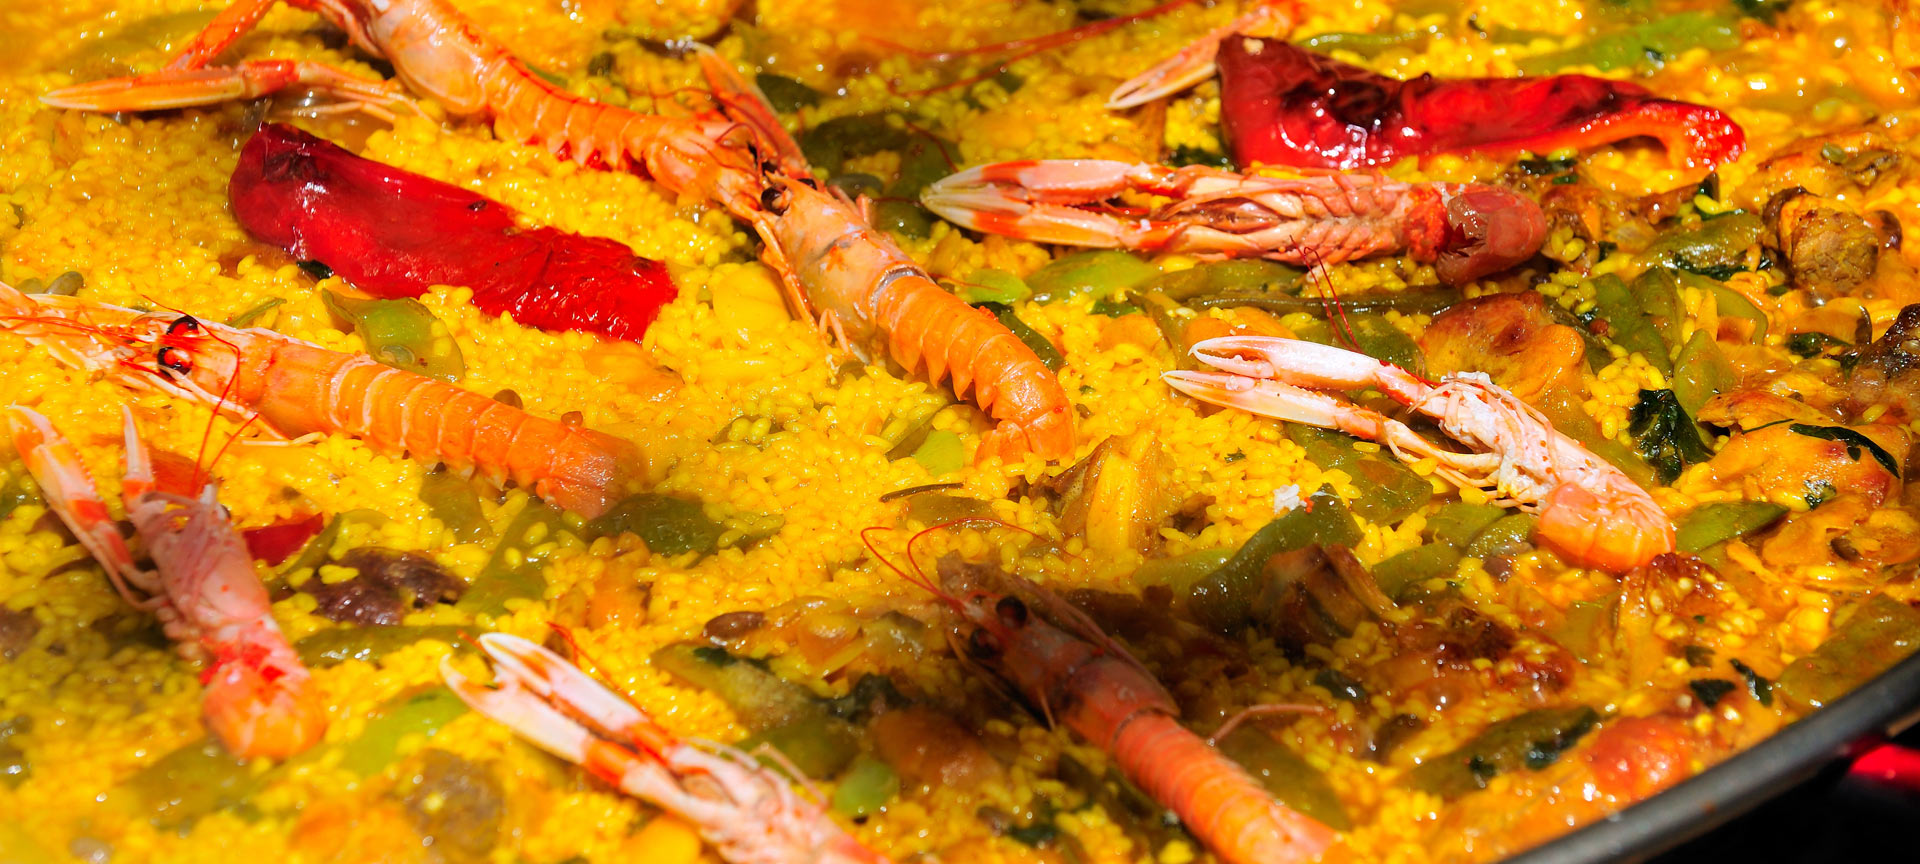 13 Famous Spanish Dishes to Eat in Spain